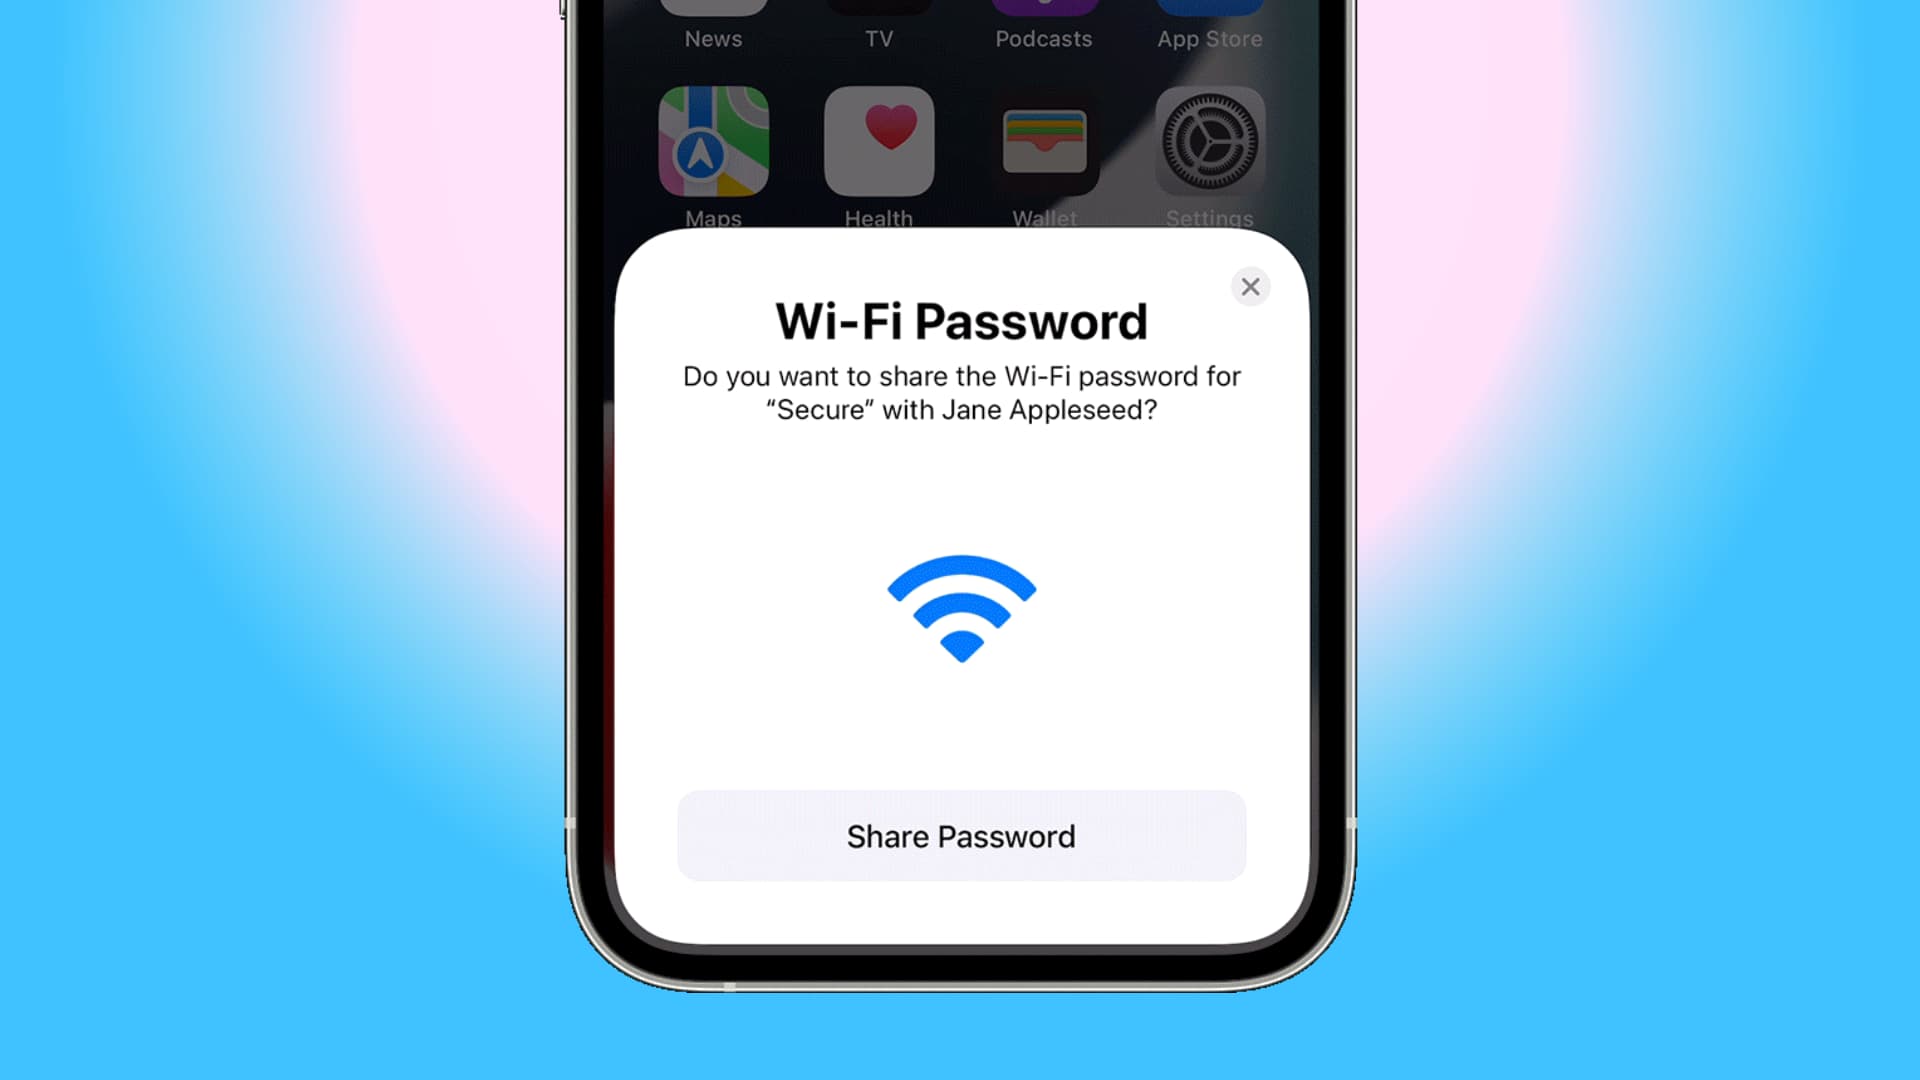 Share Wi-Fi Password alert on iPhone